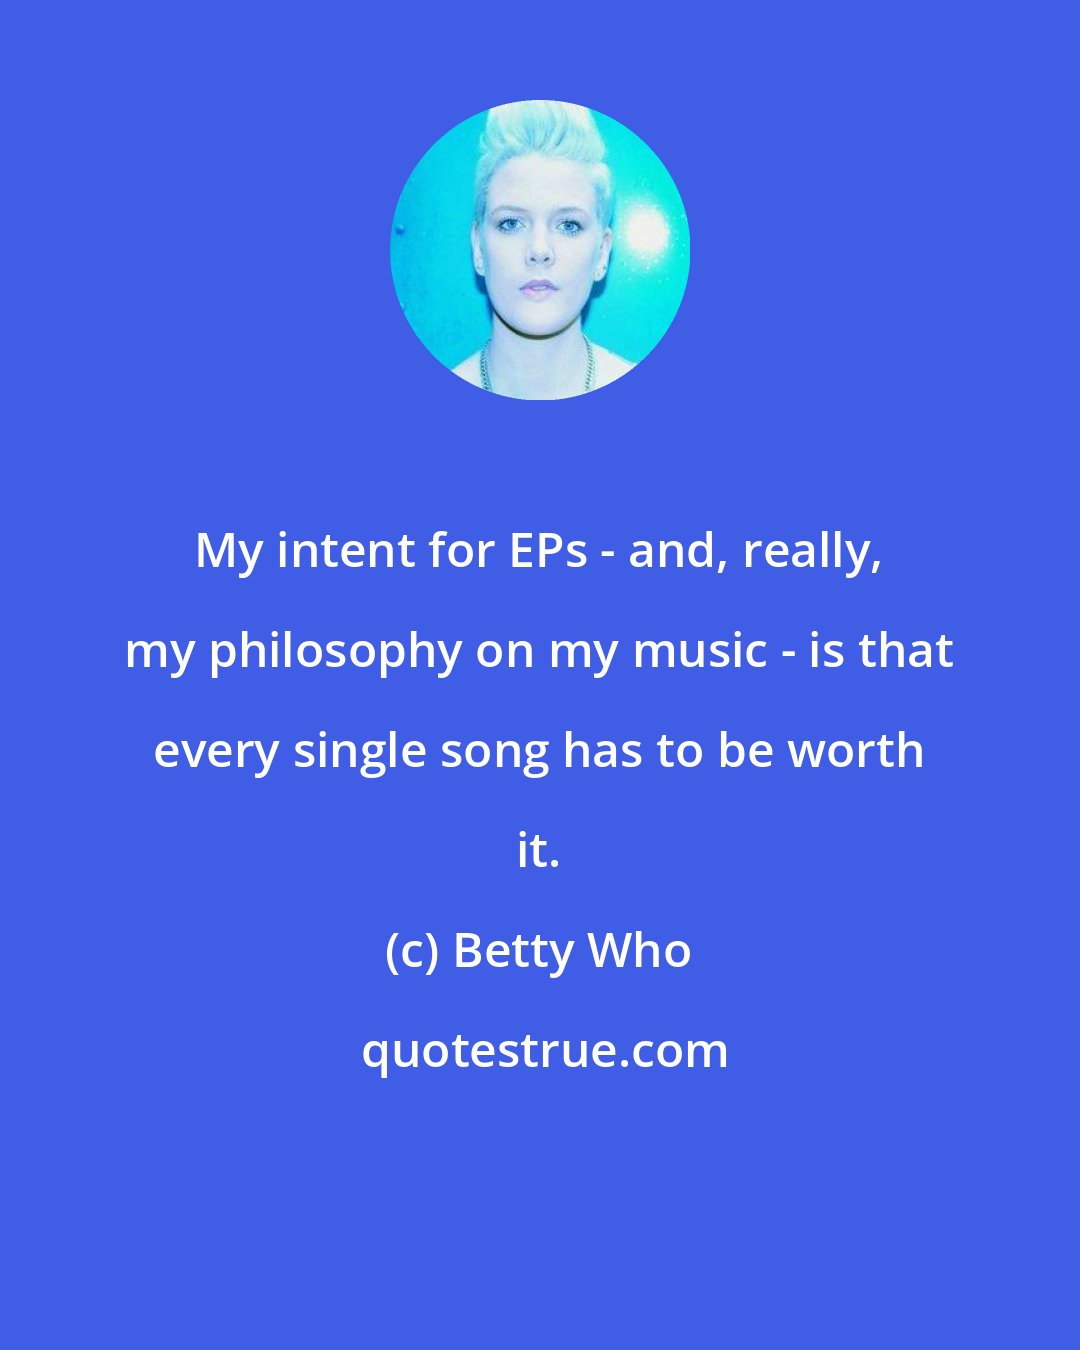 Betty Who: My intent for EPs - and, really, my philosophy on my music - is that every single song has to be worth it.